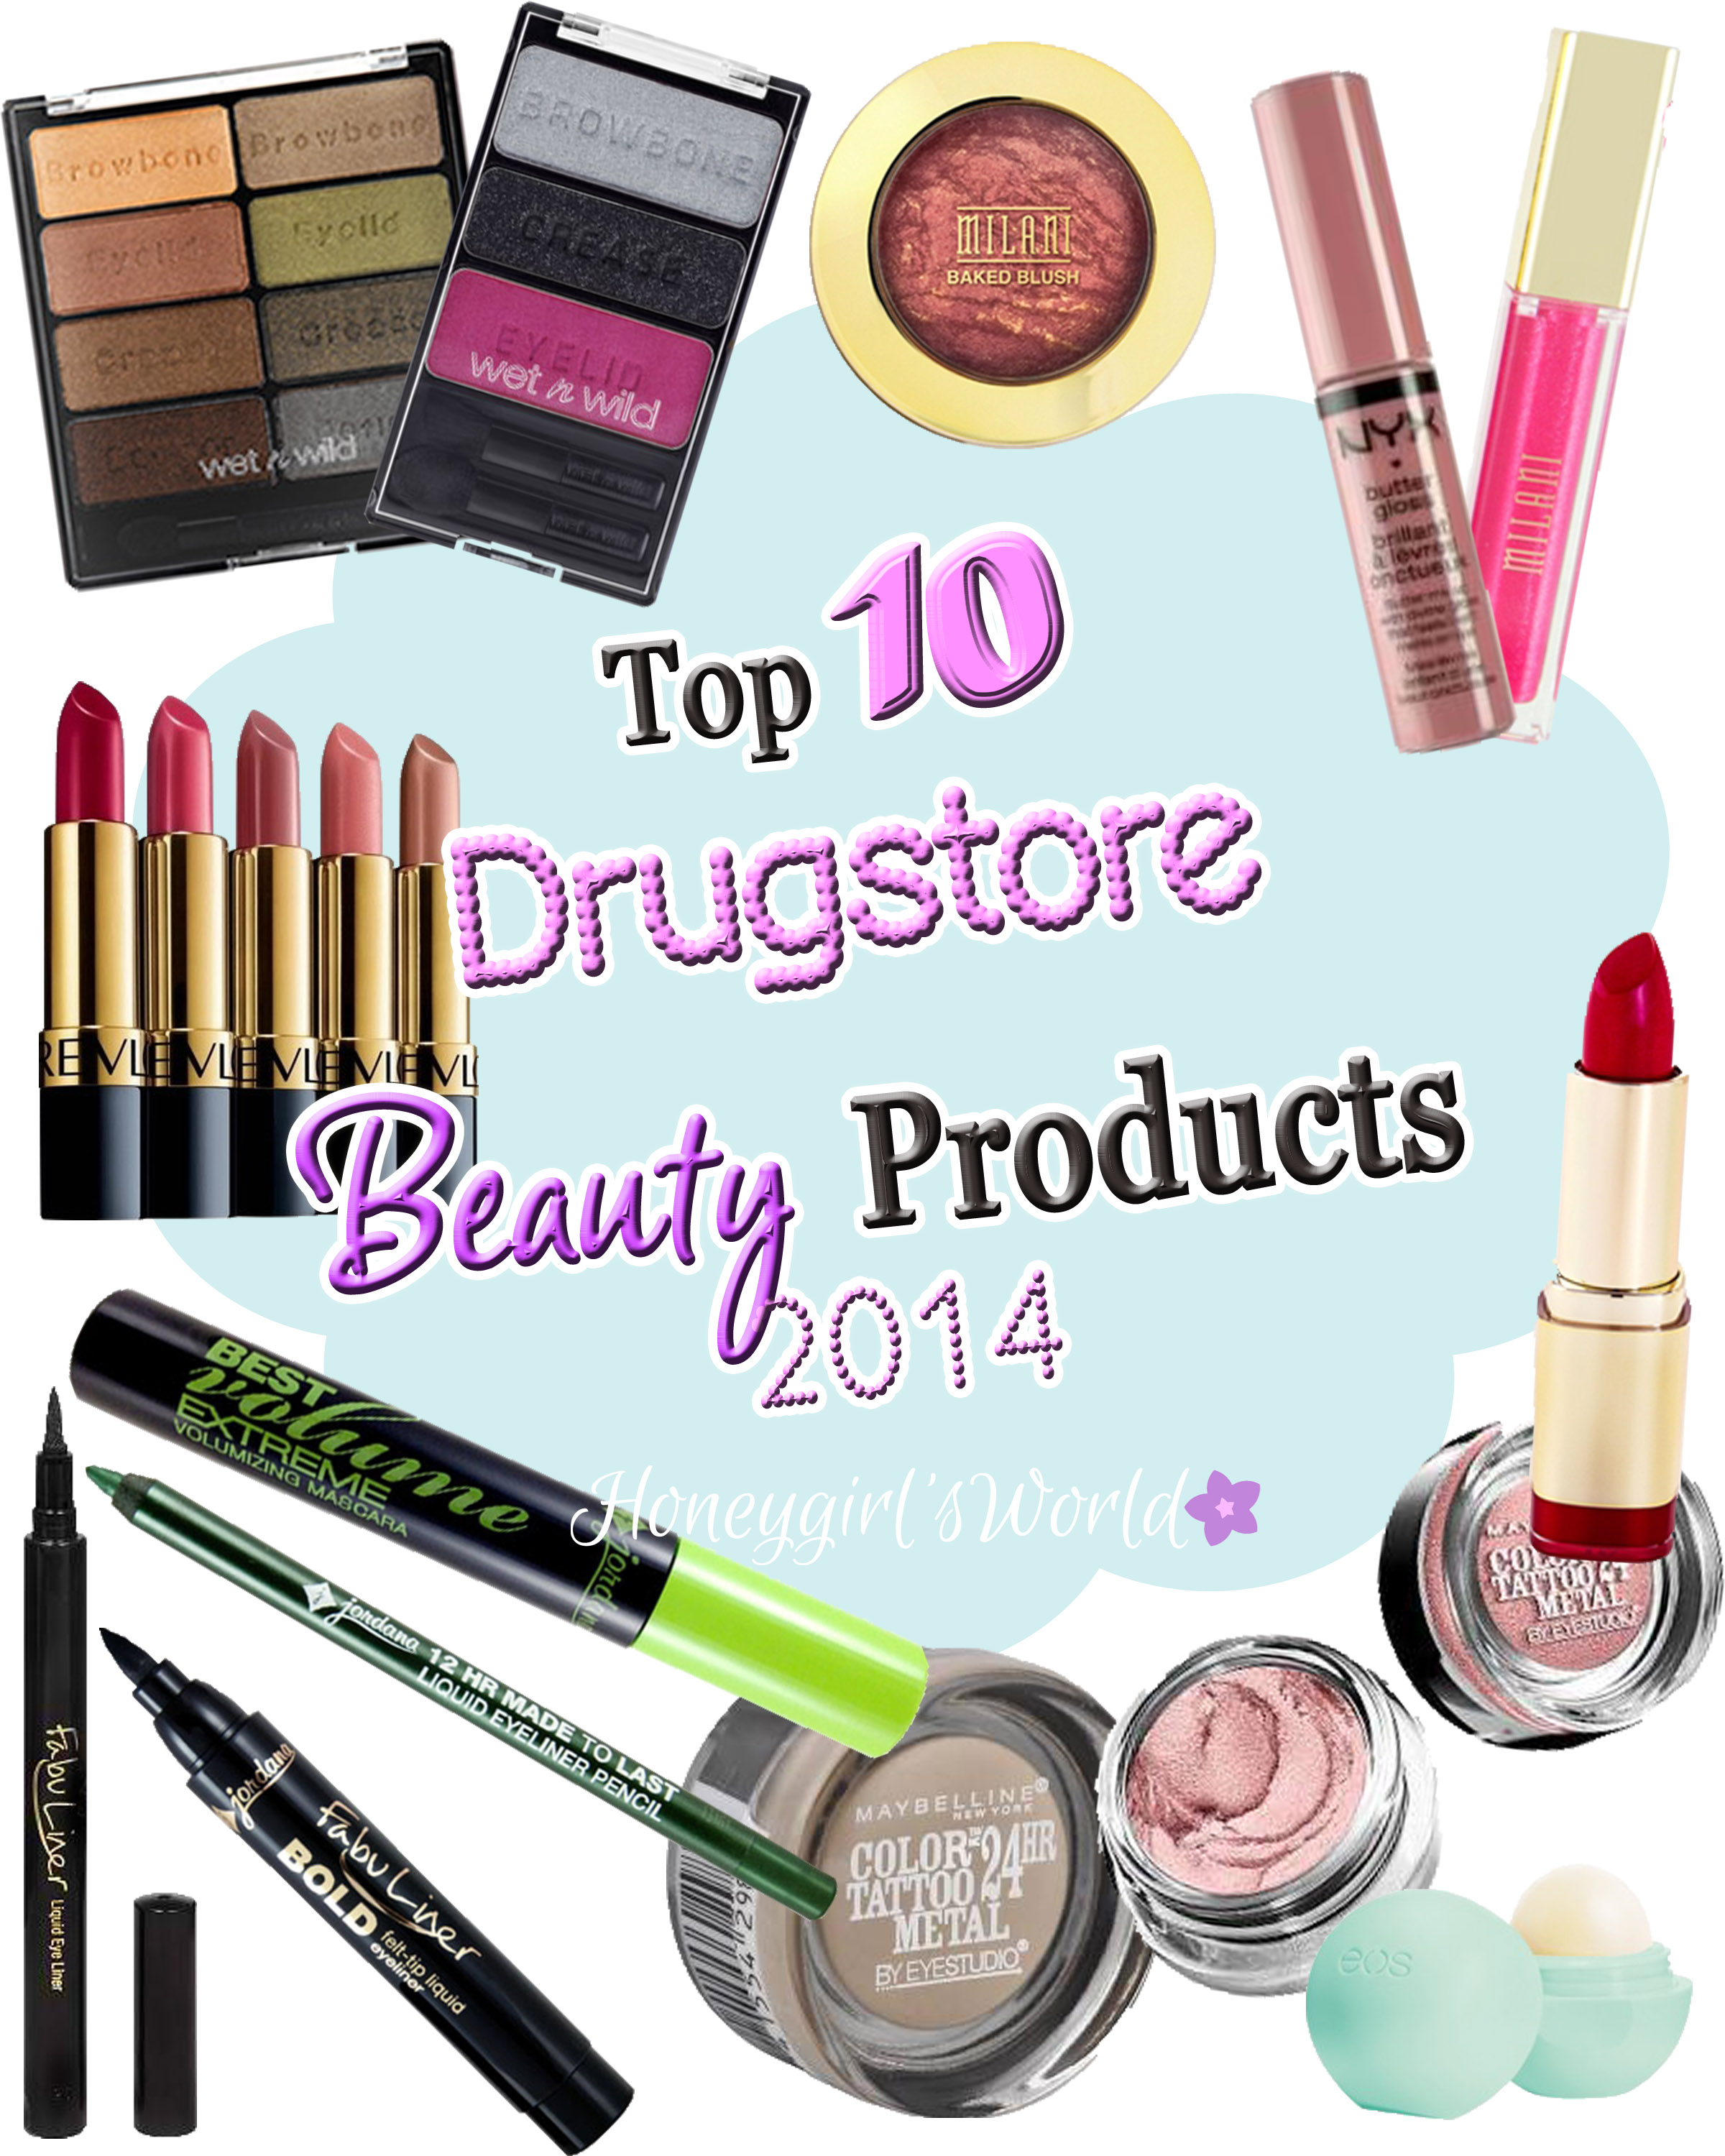 Top 10 Drugstore Beauty Products 2014